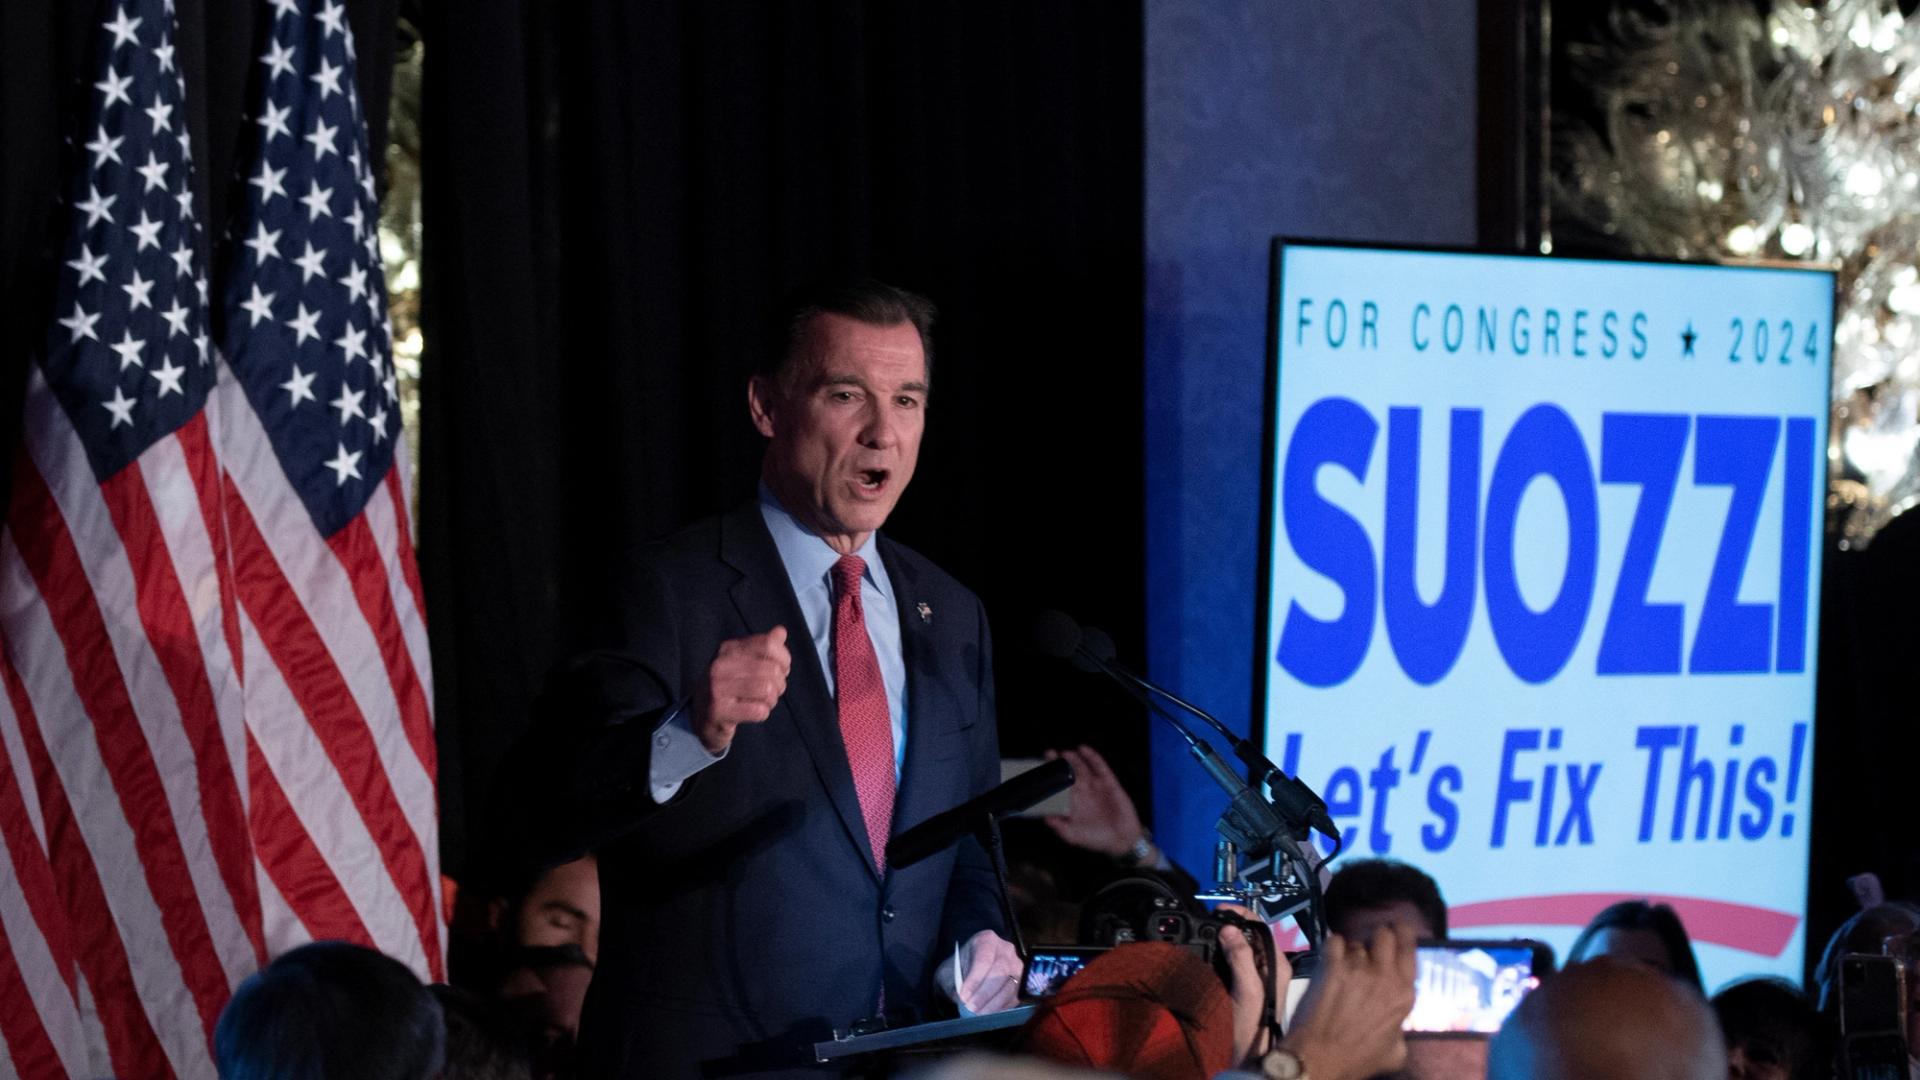 Democratic Rep.-elect for New York's 3rd district, Tom Suozzi, delivers his victory speech at his election night party, in Woodbury, New York, on Feb. 13, 2024.